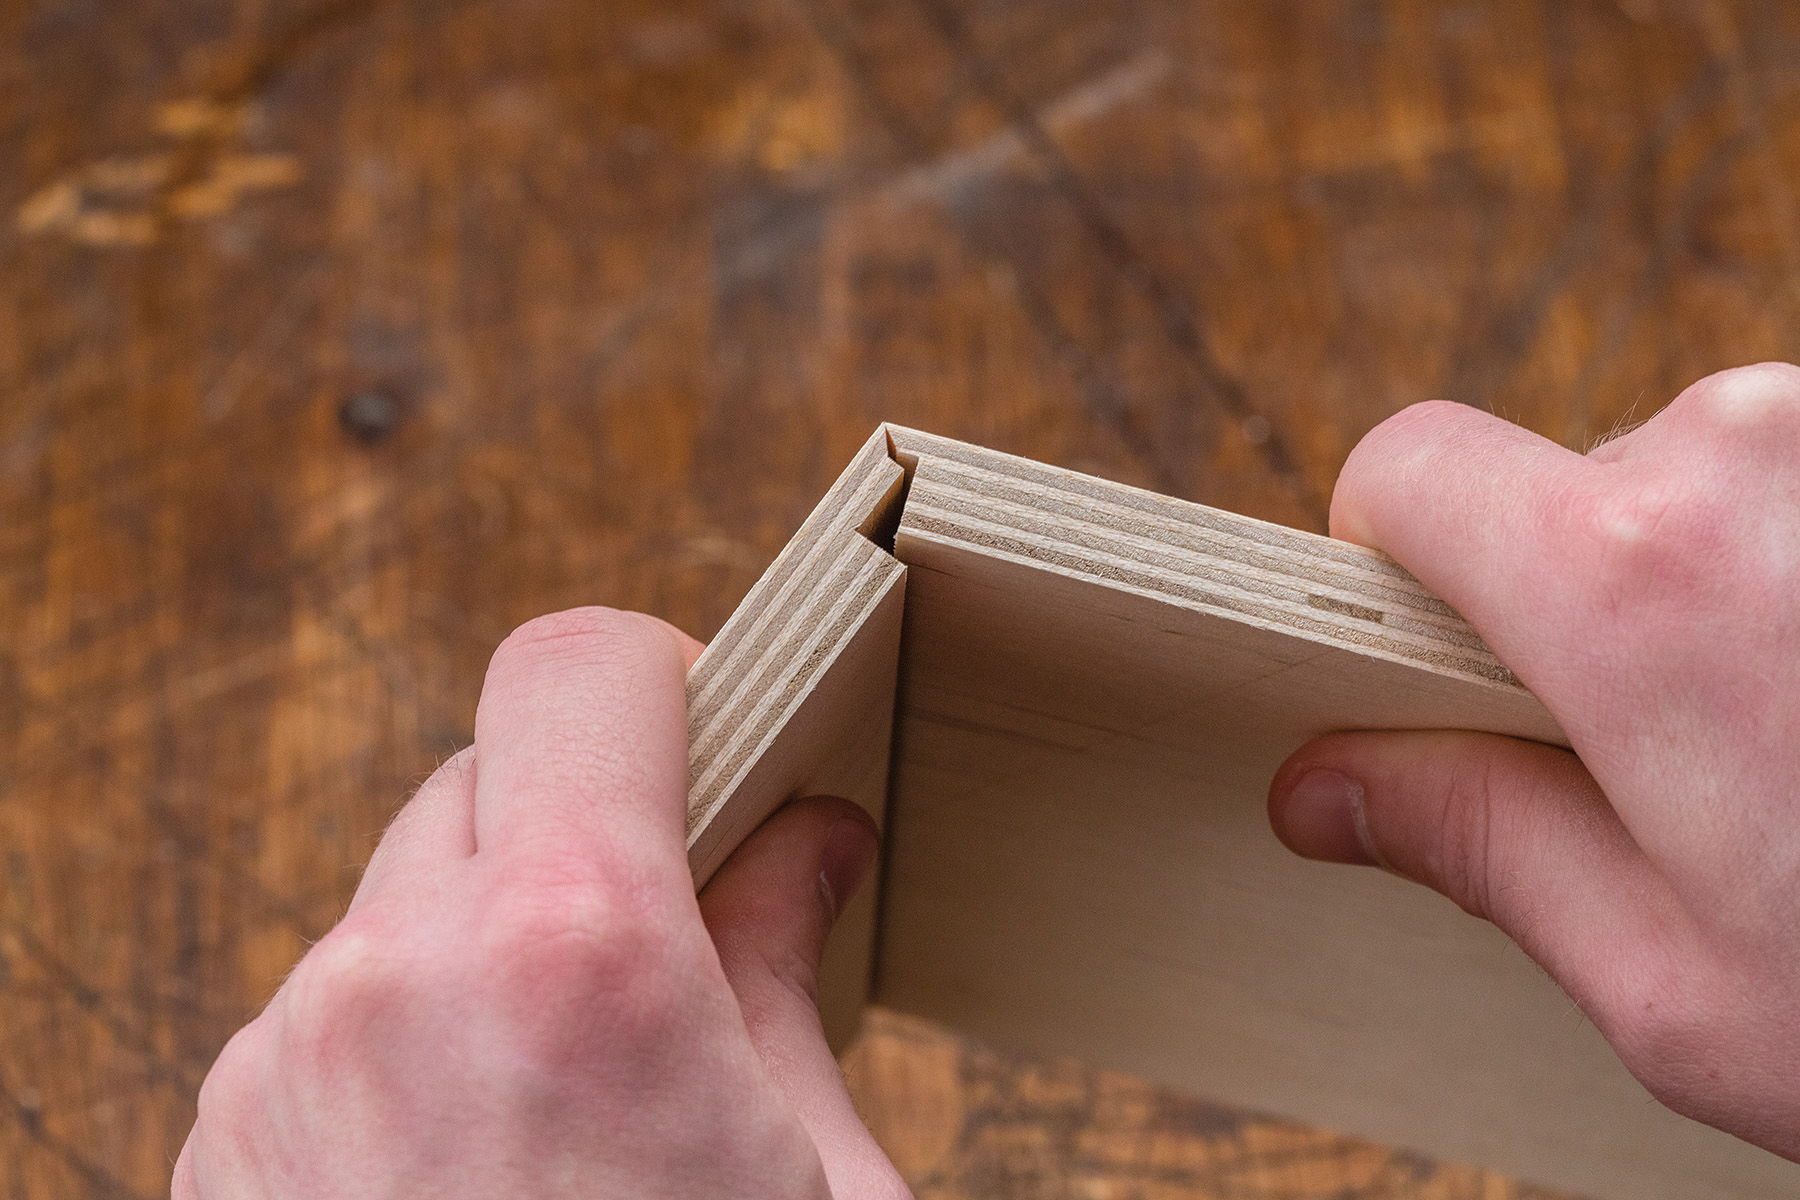 When compared to a simple v-groove miter fold, the Rockler Miter Fold makes a joint that is stronger, easier to clamp and less prone to glue squeeze-out.